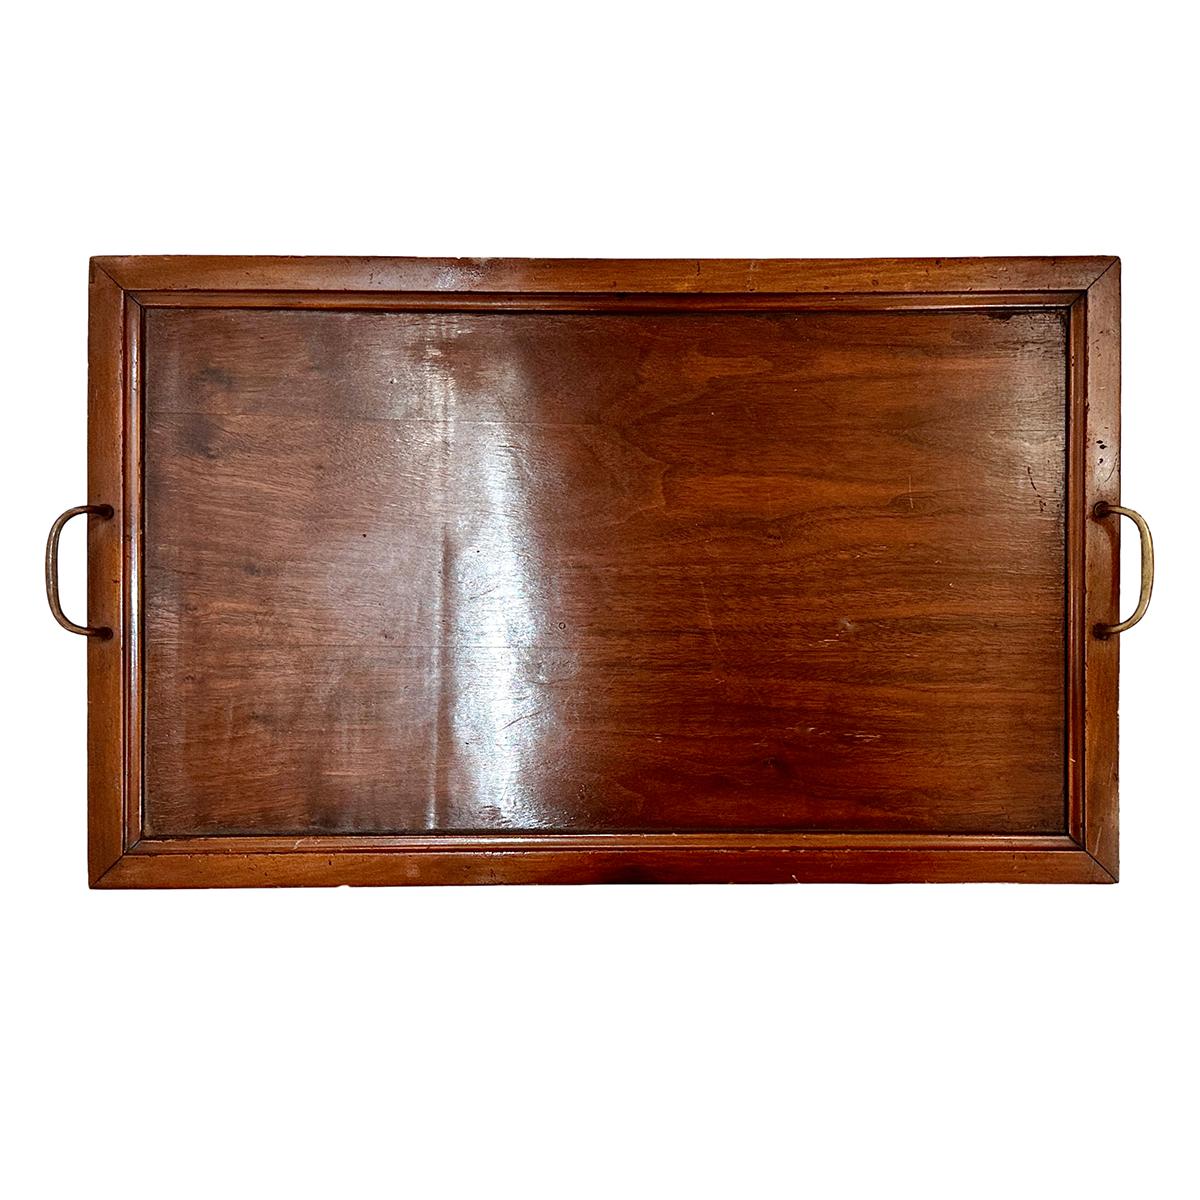 A circa 1940's English wood tray with brass handles.

Measurements:
Height: 2